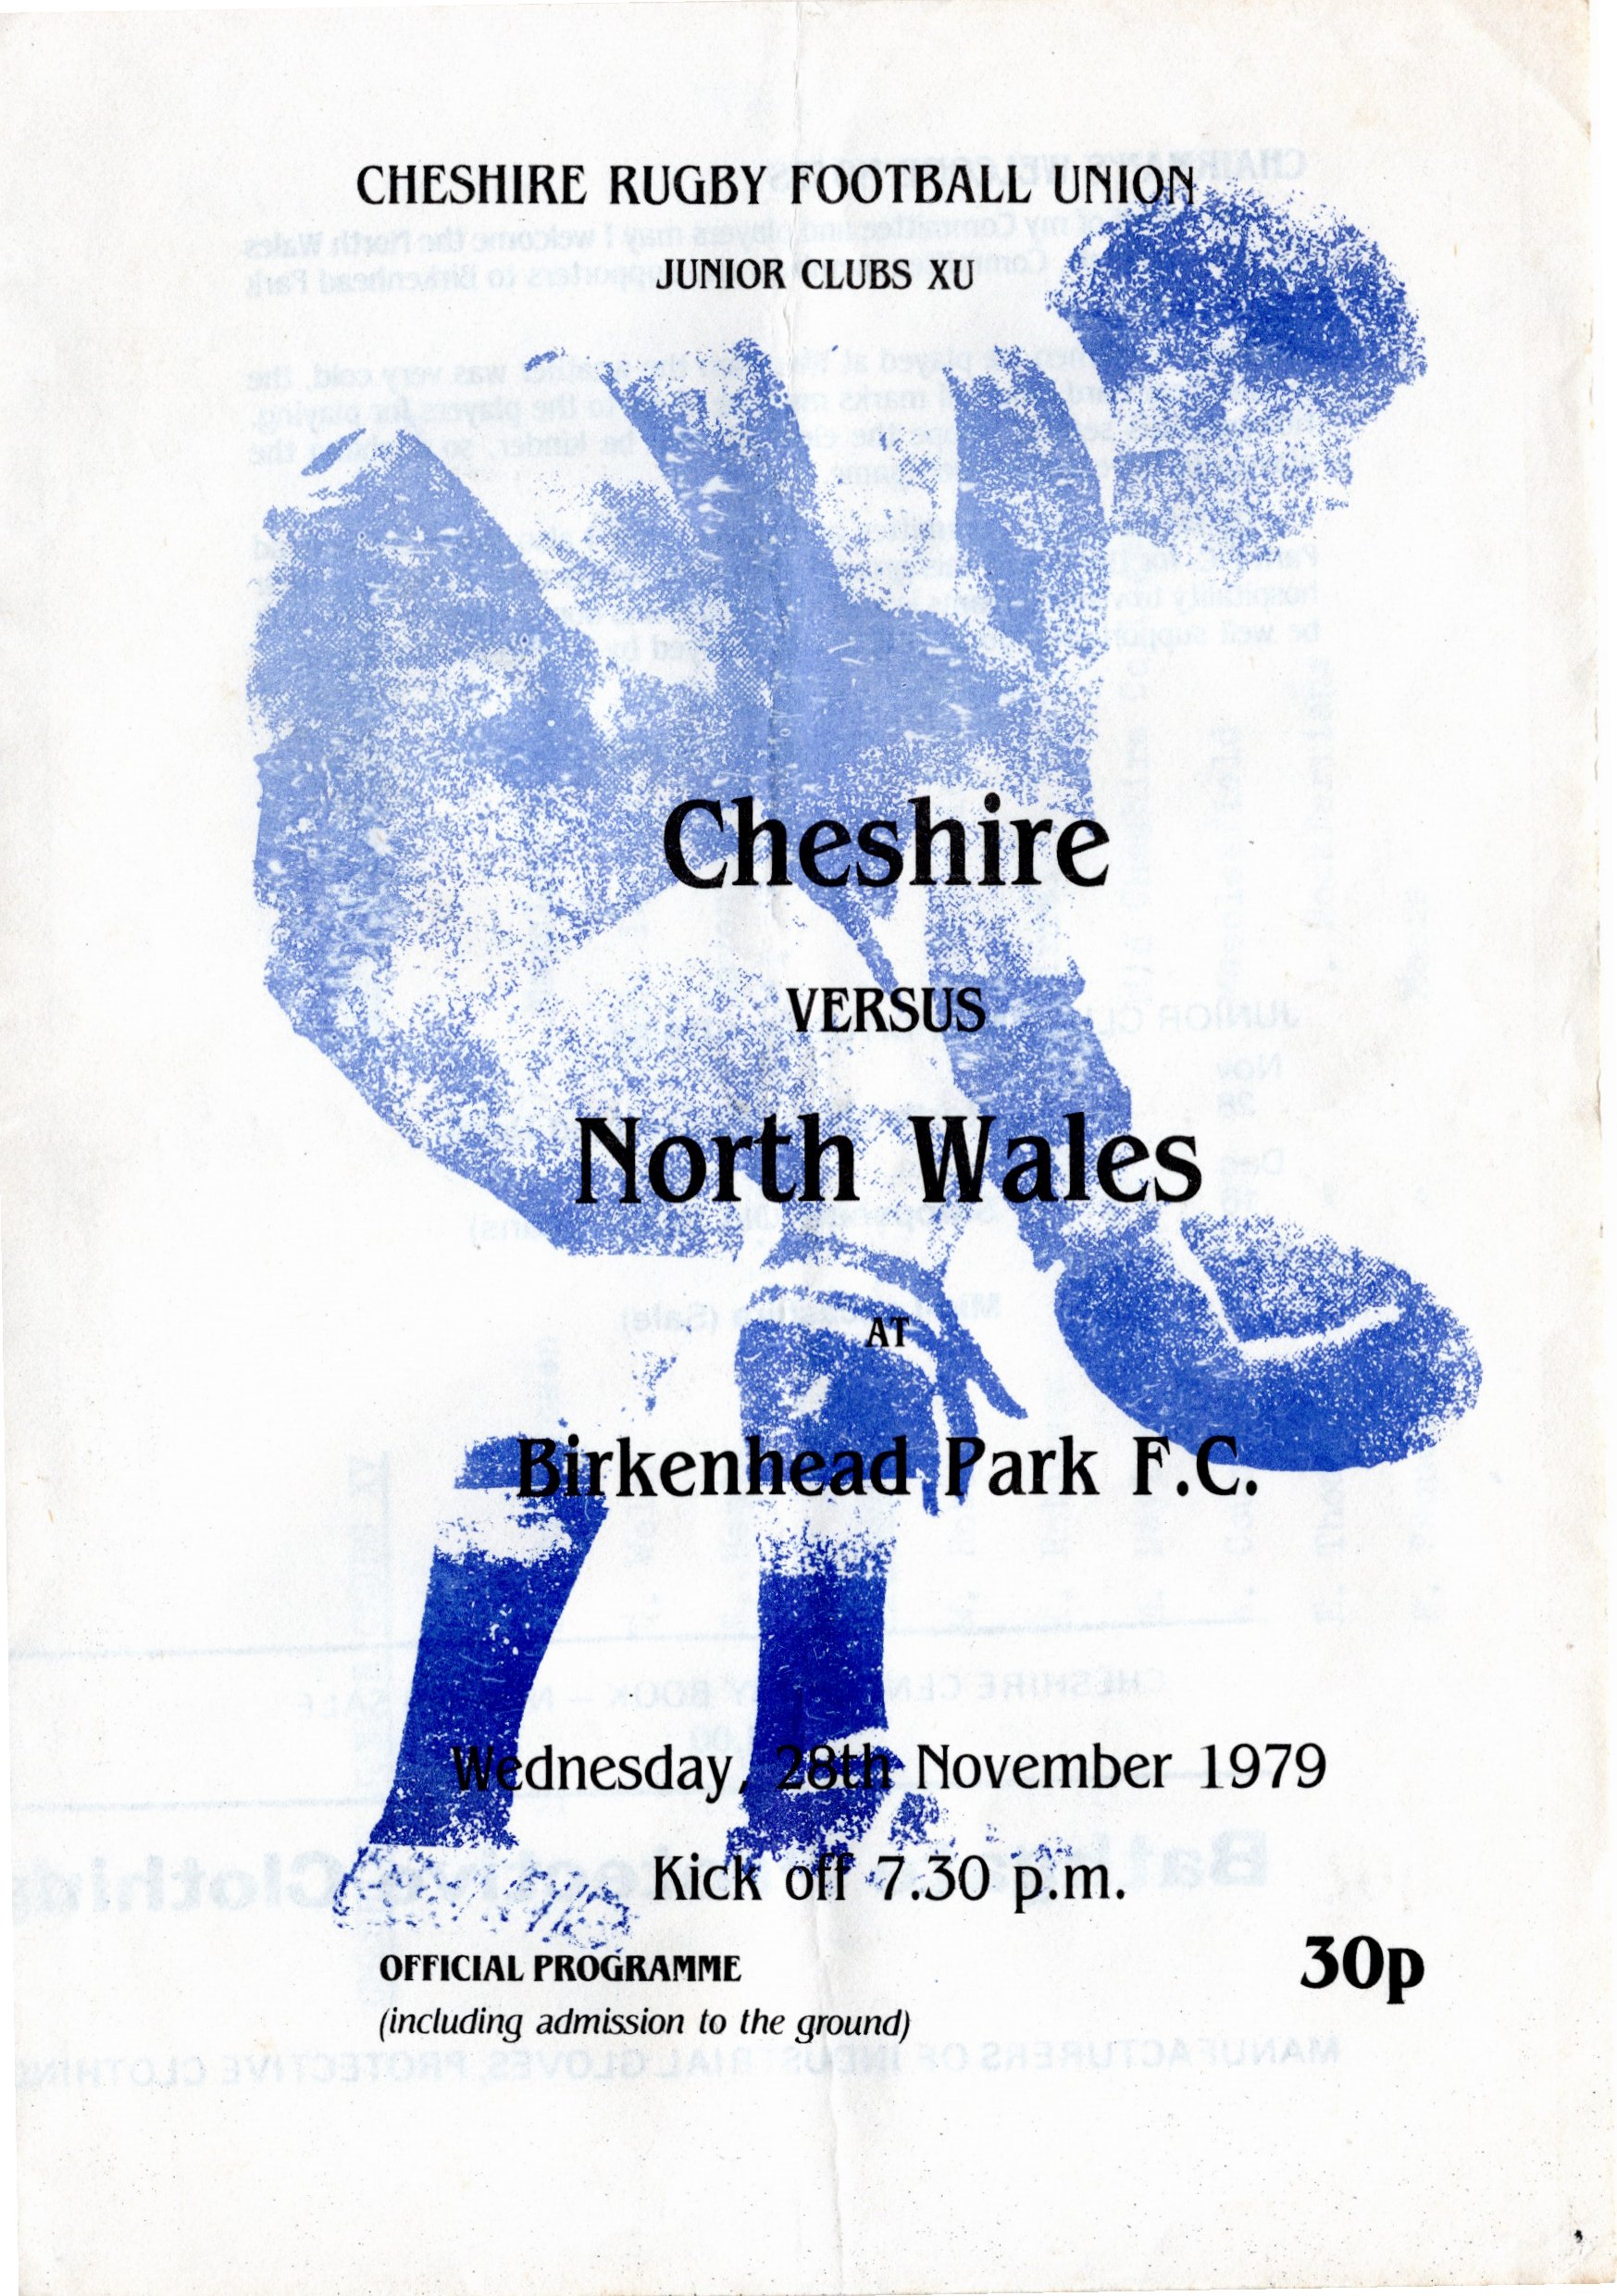 Photograph Old Instonians RUFC, 1979 Cheshire v North Wales